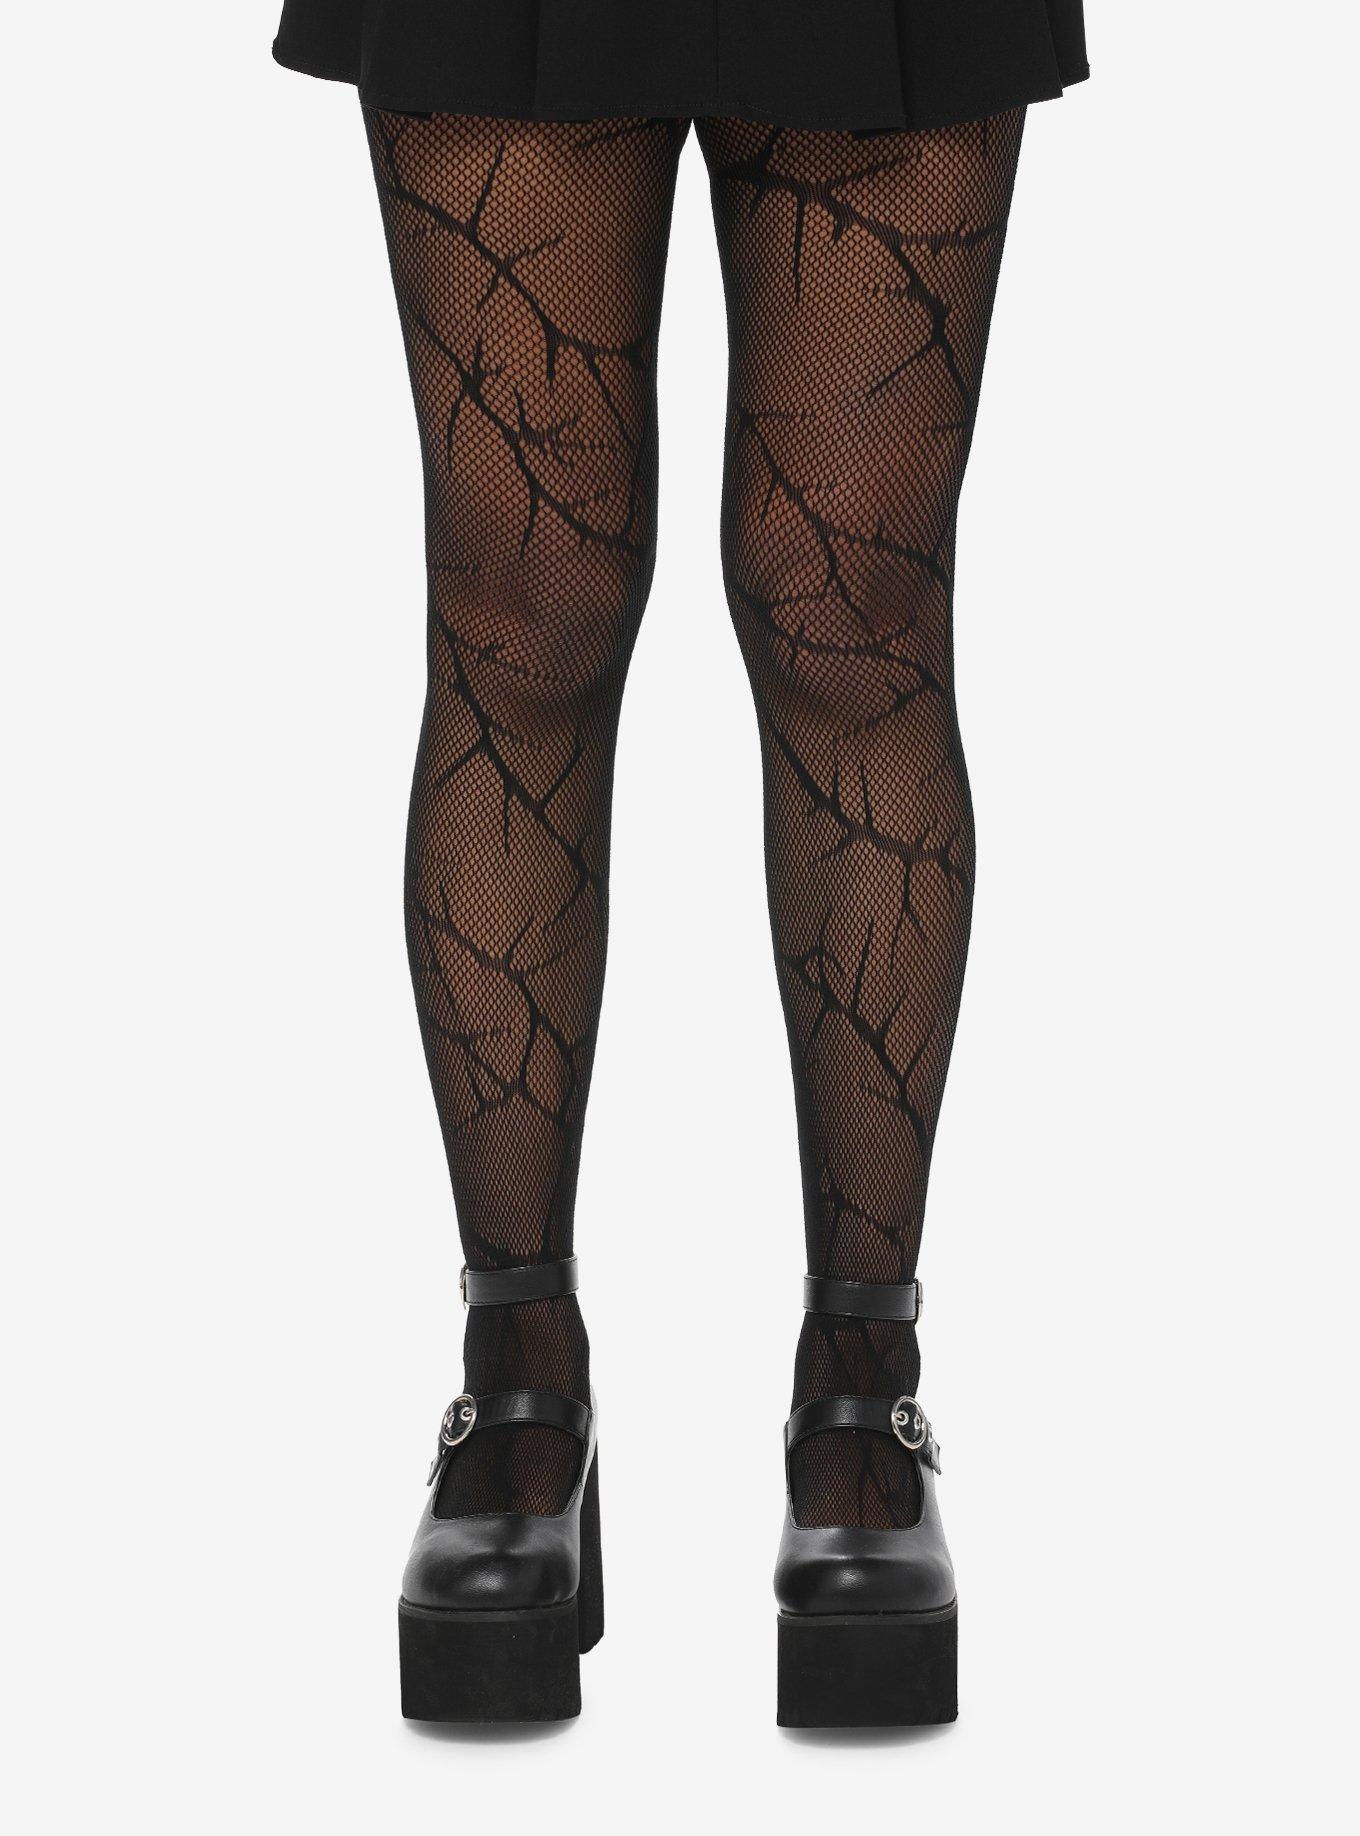 277px x 364px - Girls Tights: Fishnet Tights, Black Tights & Pantyhose | Hot Topic